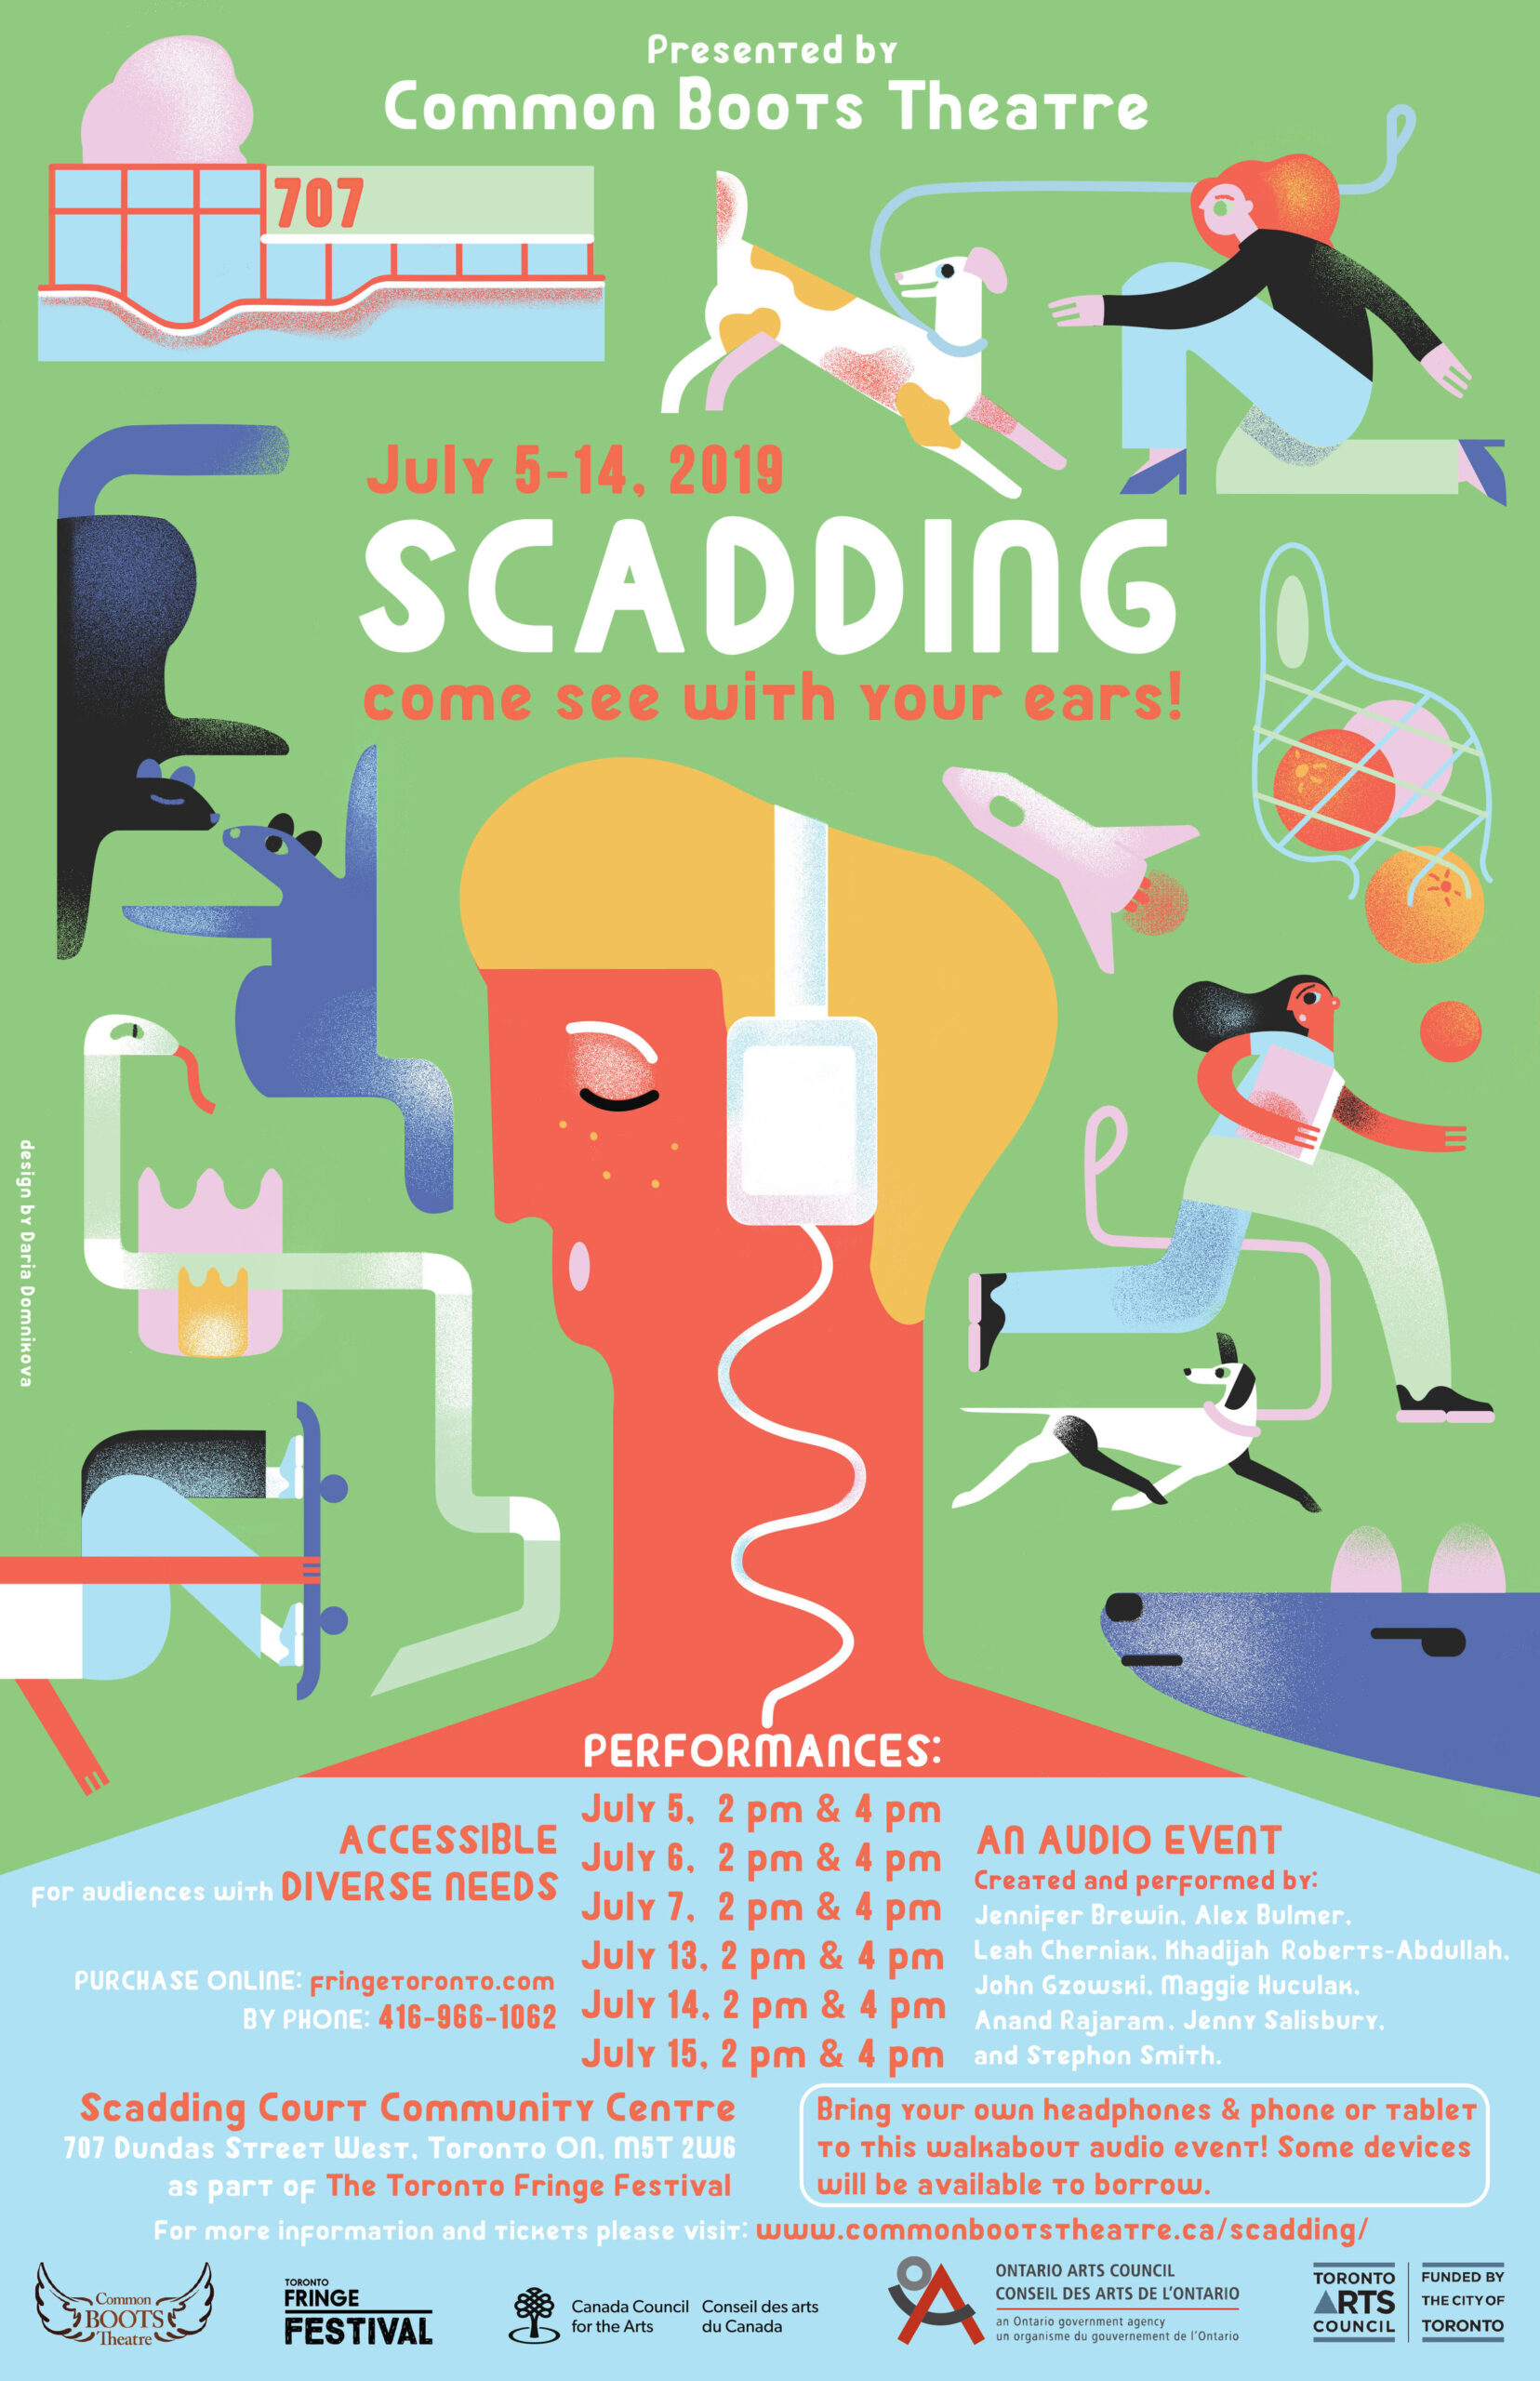 Poster of the event, features a impressionist style man with red skin, mustard head wearing rectangular headphones surrounded by various elements including a dog walkers, a snake, skateboarding, fruit and various other items